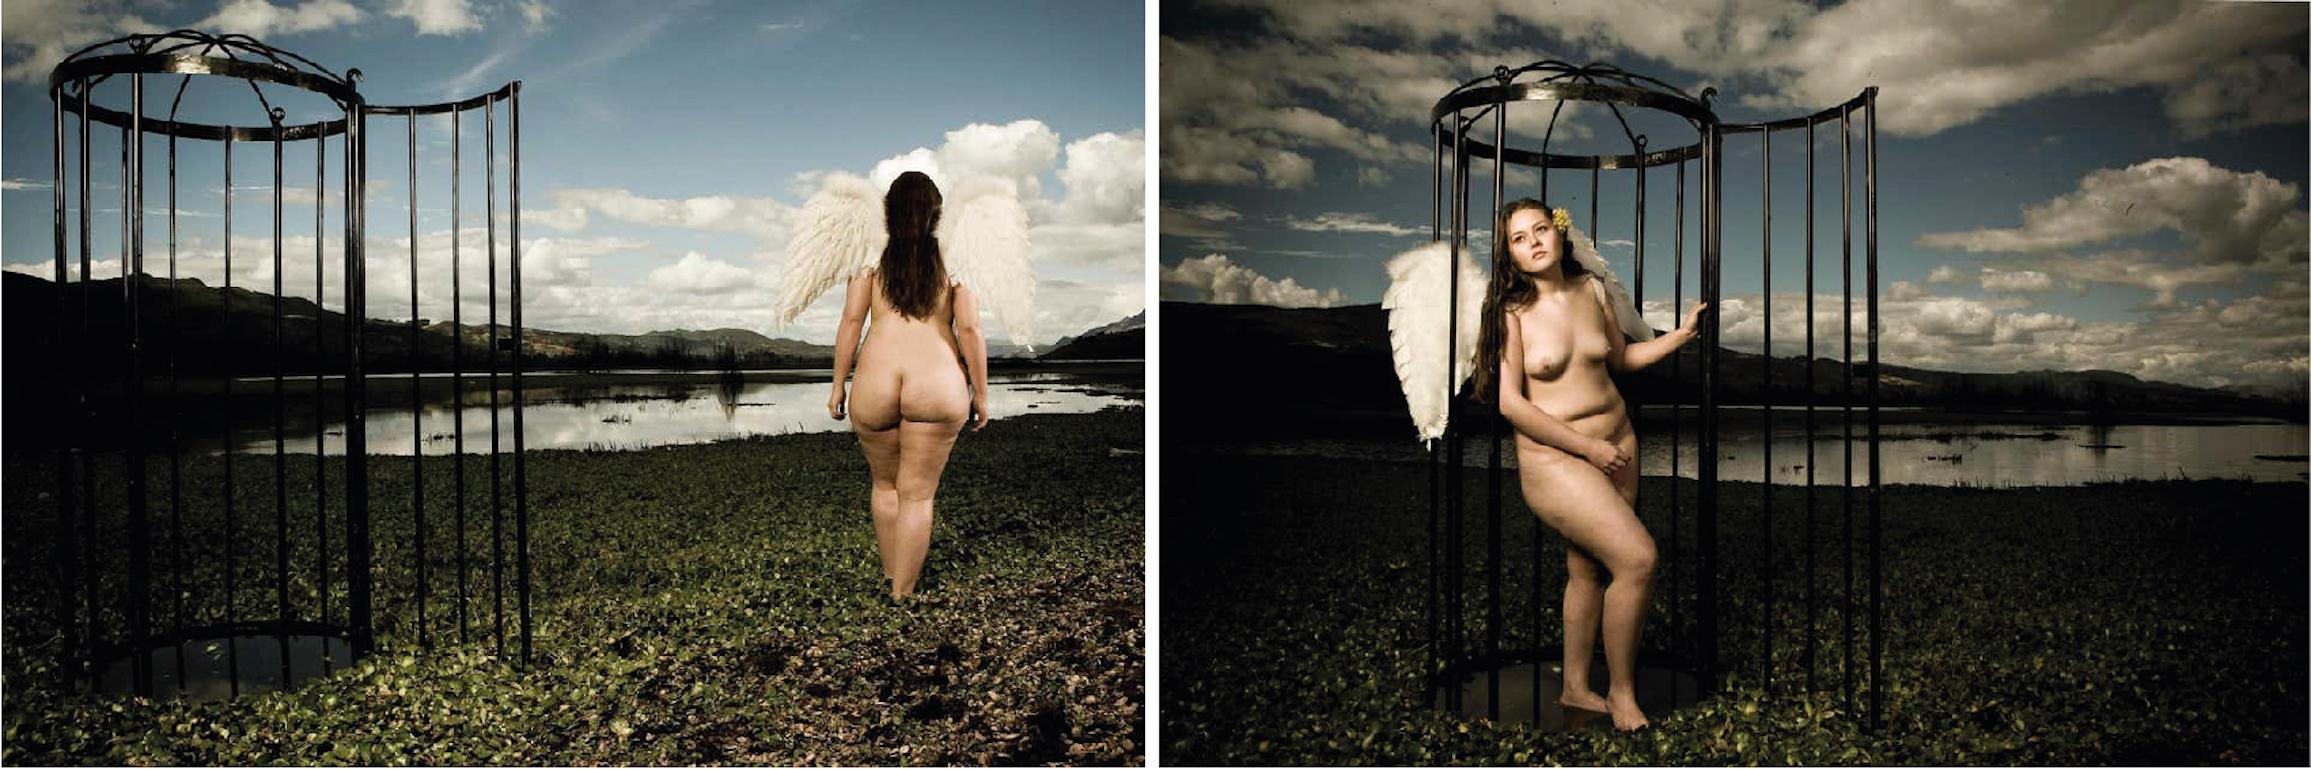 Diptych From 'Beauty and Fantasy' series. Nude and Landscape  Color photograph